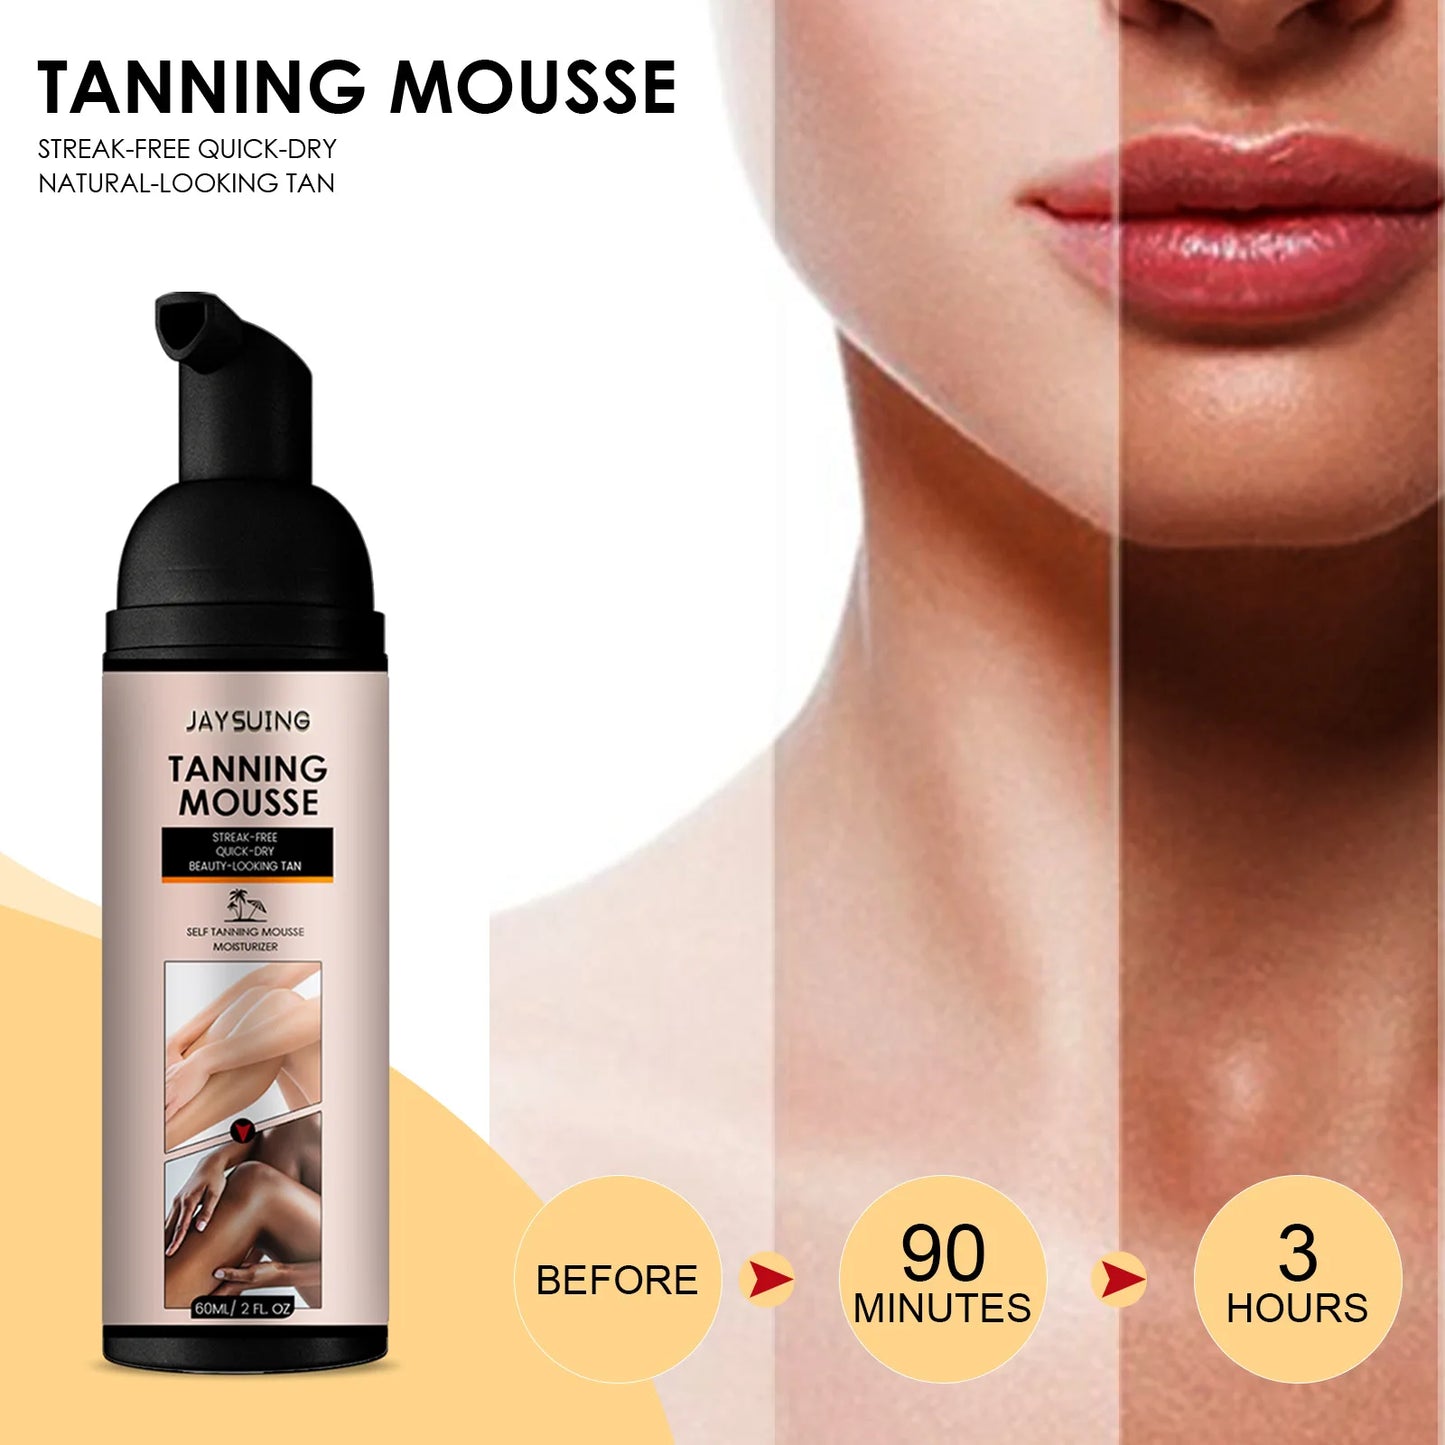 Tanning Cream - Tan Sunless Body Bronzing Mousse, Natural Self Tanner with Skin Shine and Moisturizing Protection, Comparable to Coco & Eve